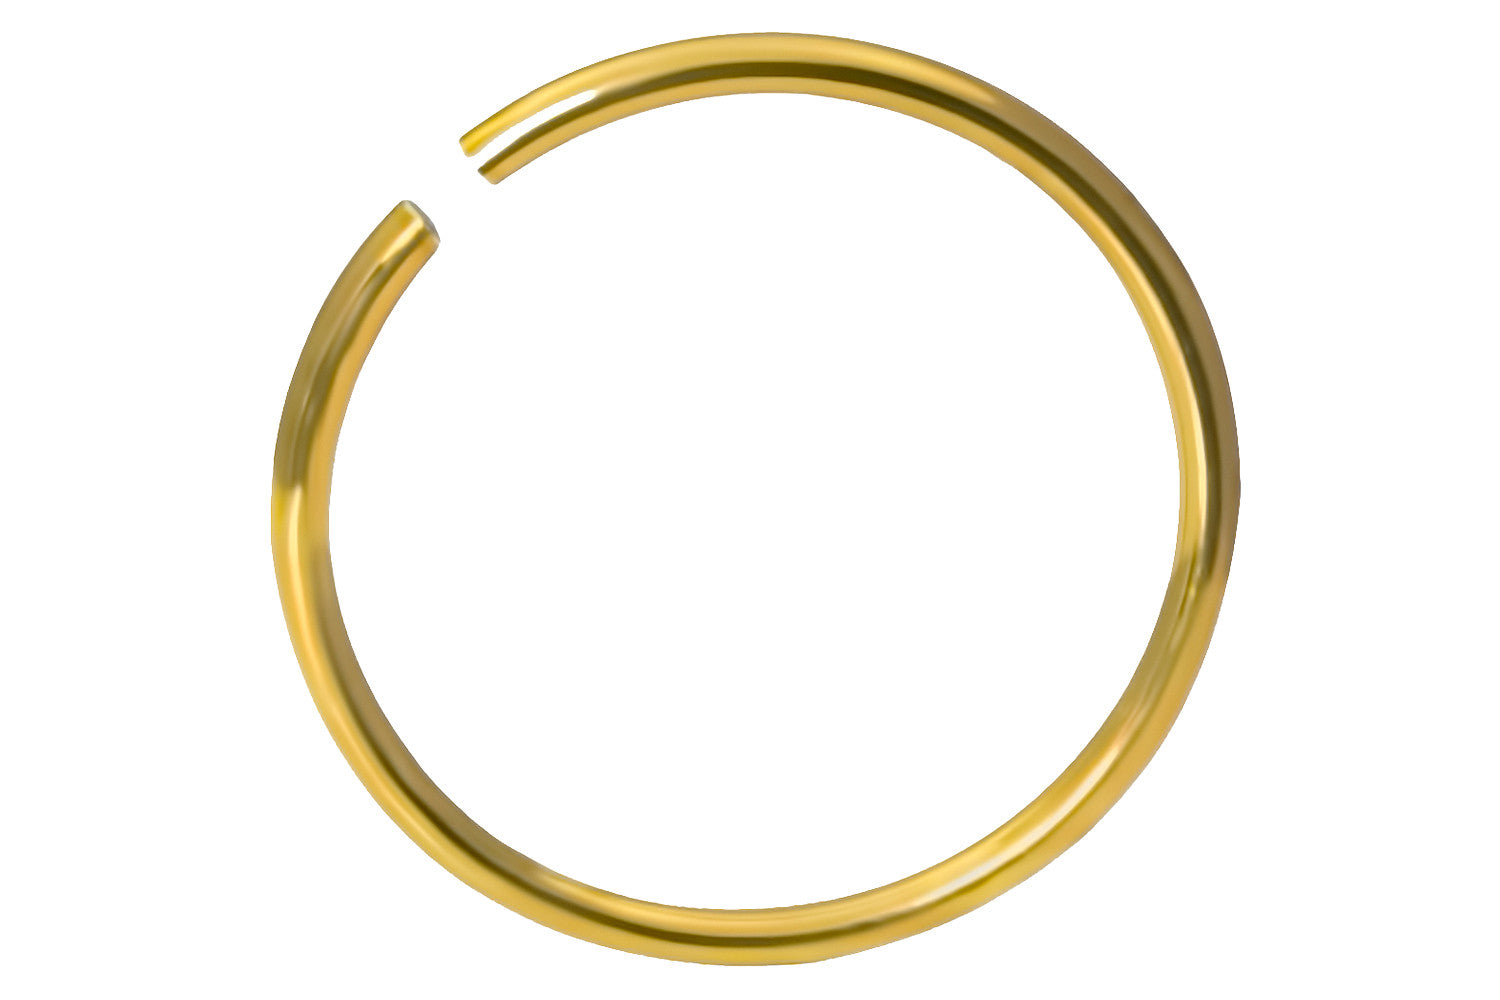 Titanium Anodized Gold Small Nose Hoop